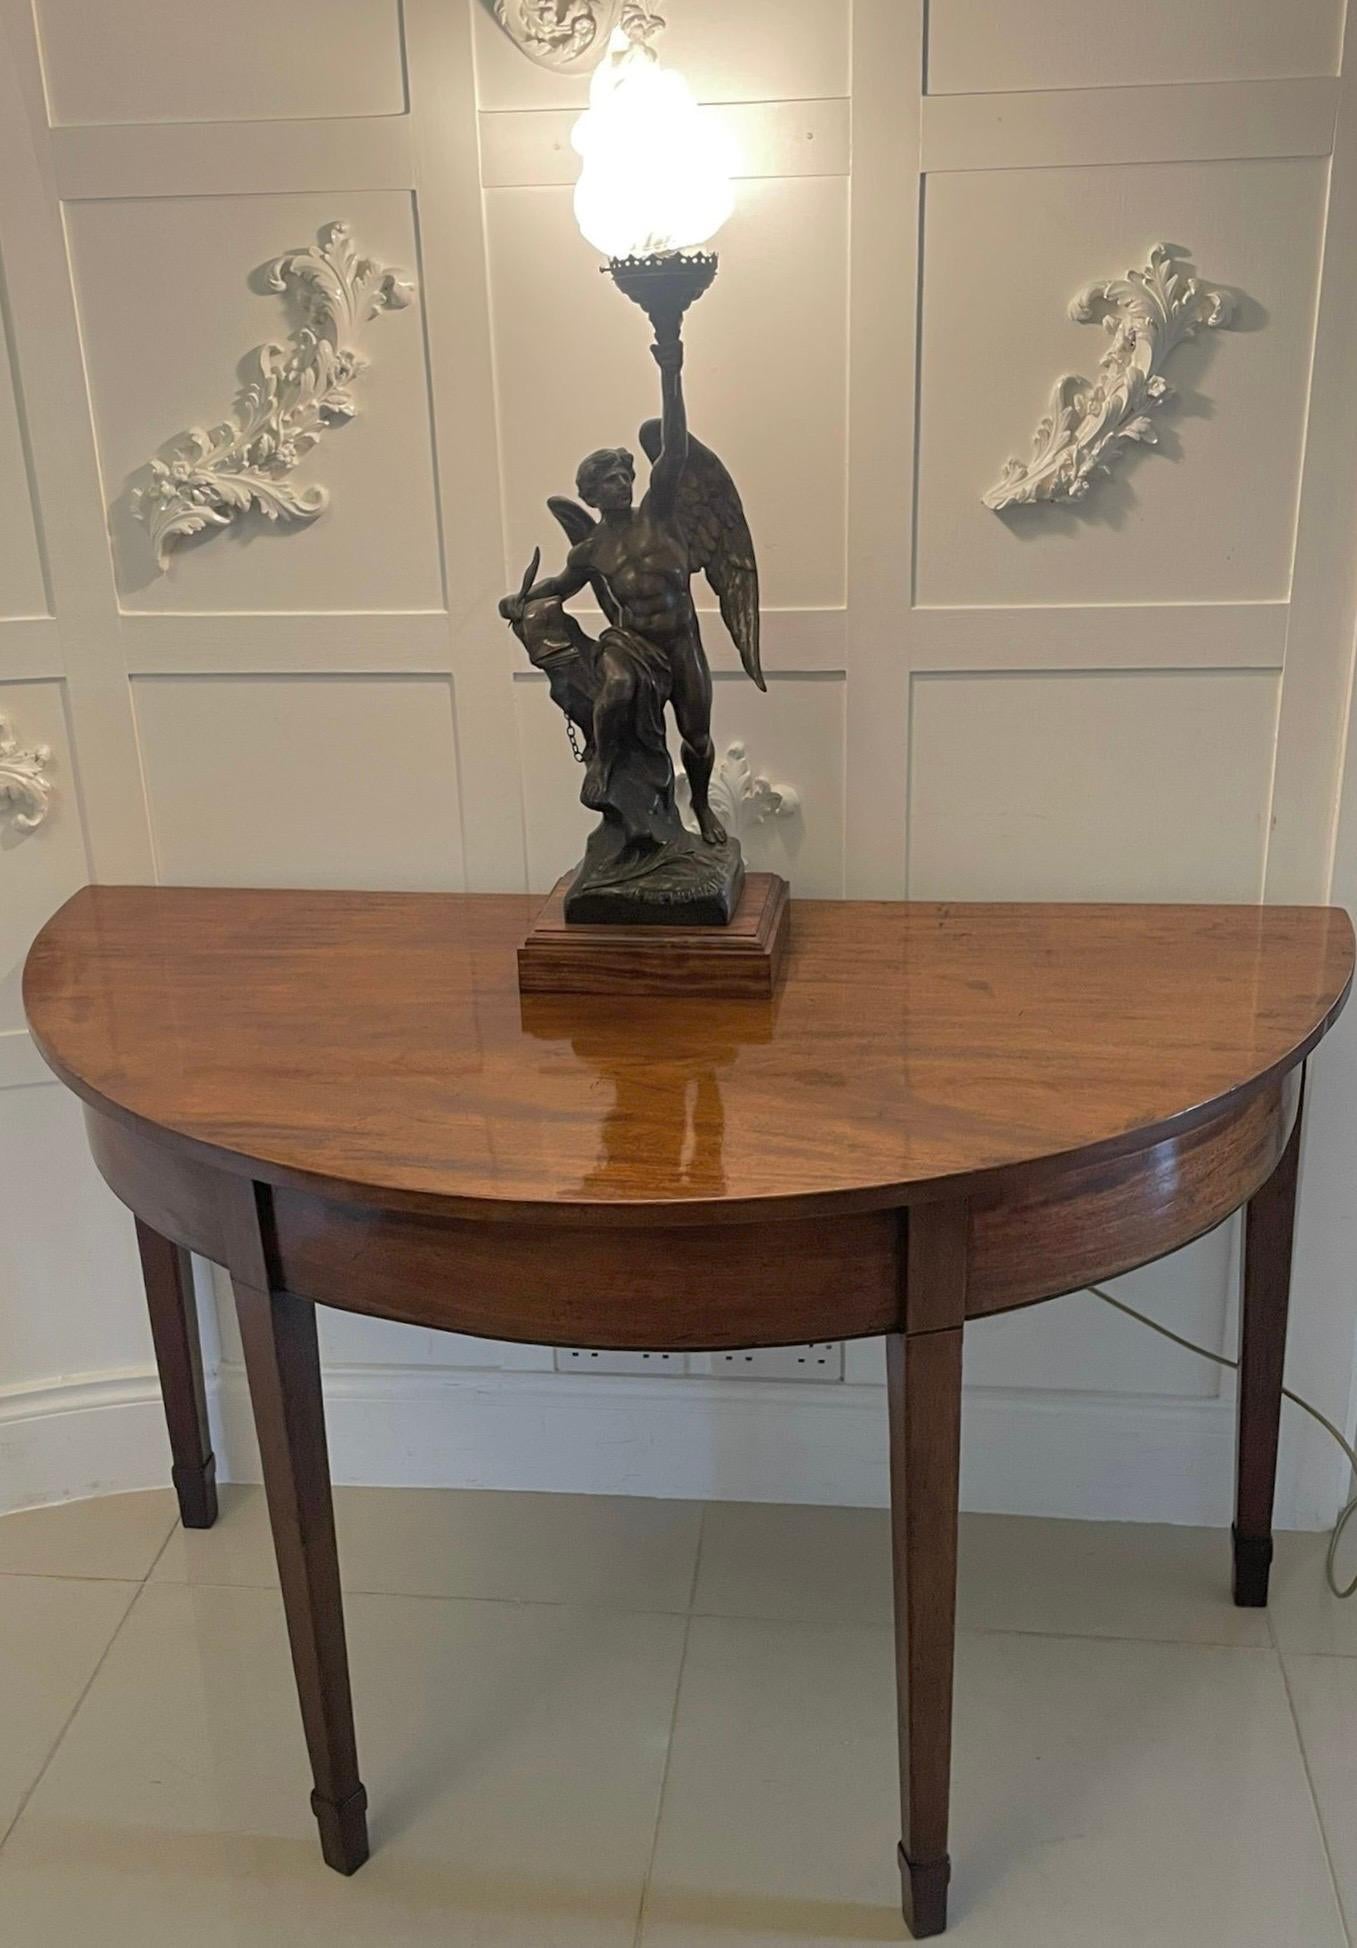 Large pair of antique George III quality  mahogany demi lune console tables having quality figured mahogany demi lune shaped tops above a figured mahogany frieze with ebony and satinwood inlay stringing.  They stand on four elegant mahogany square